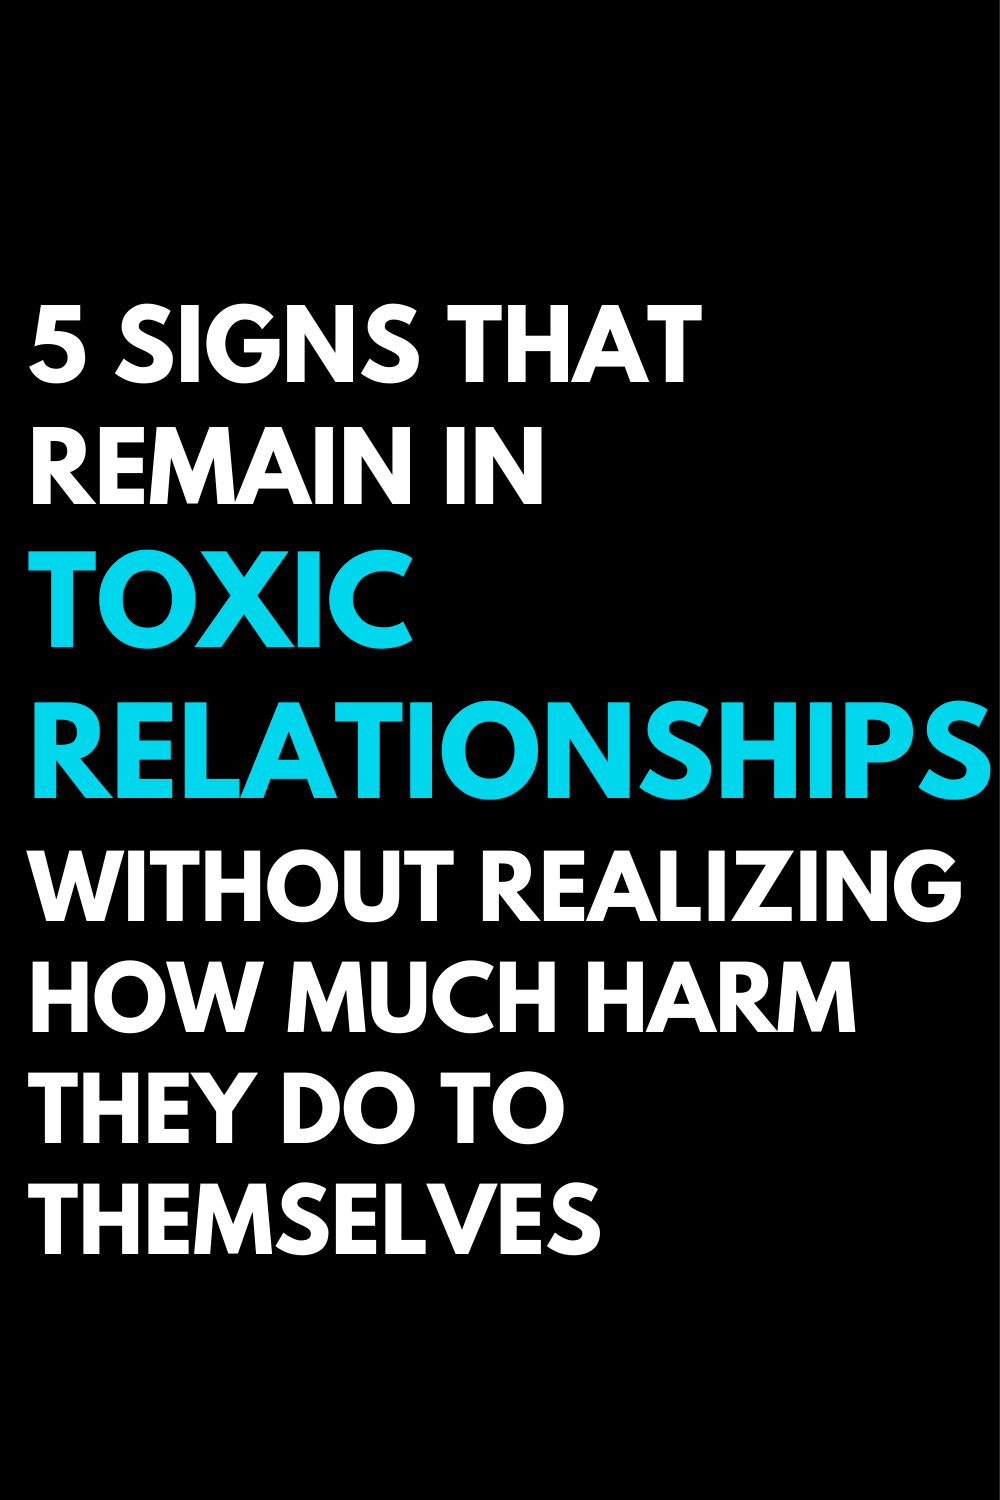 5 signs that remain in toxic relationships without realizing how much harm they do to themselves